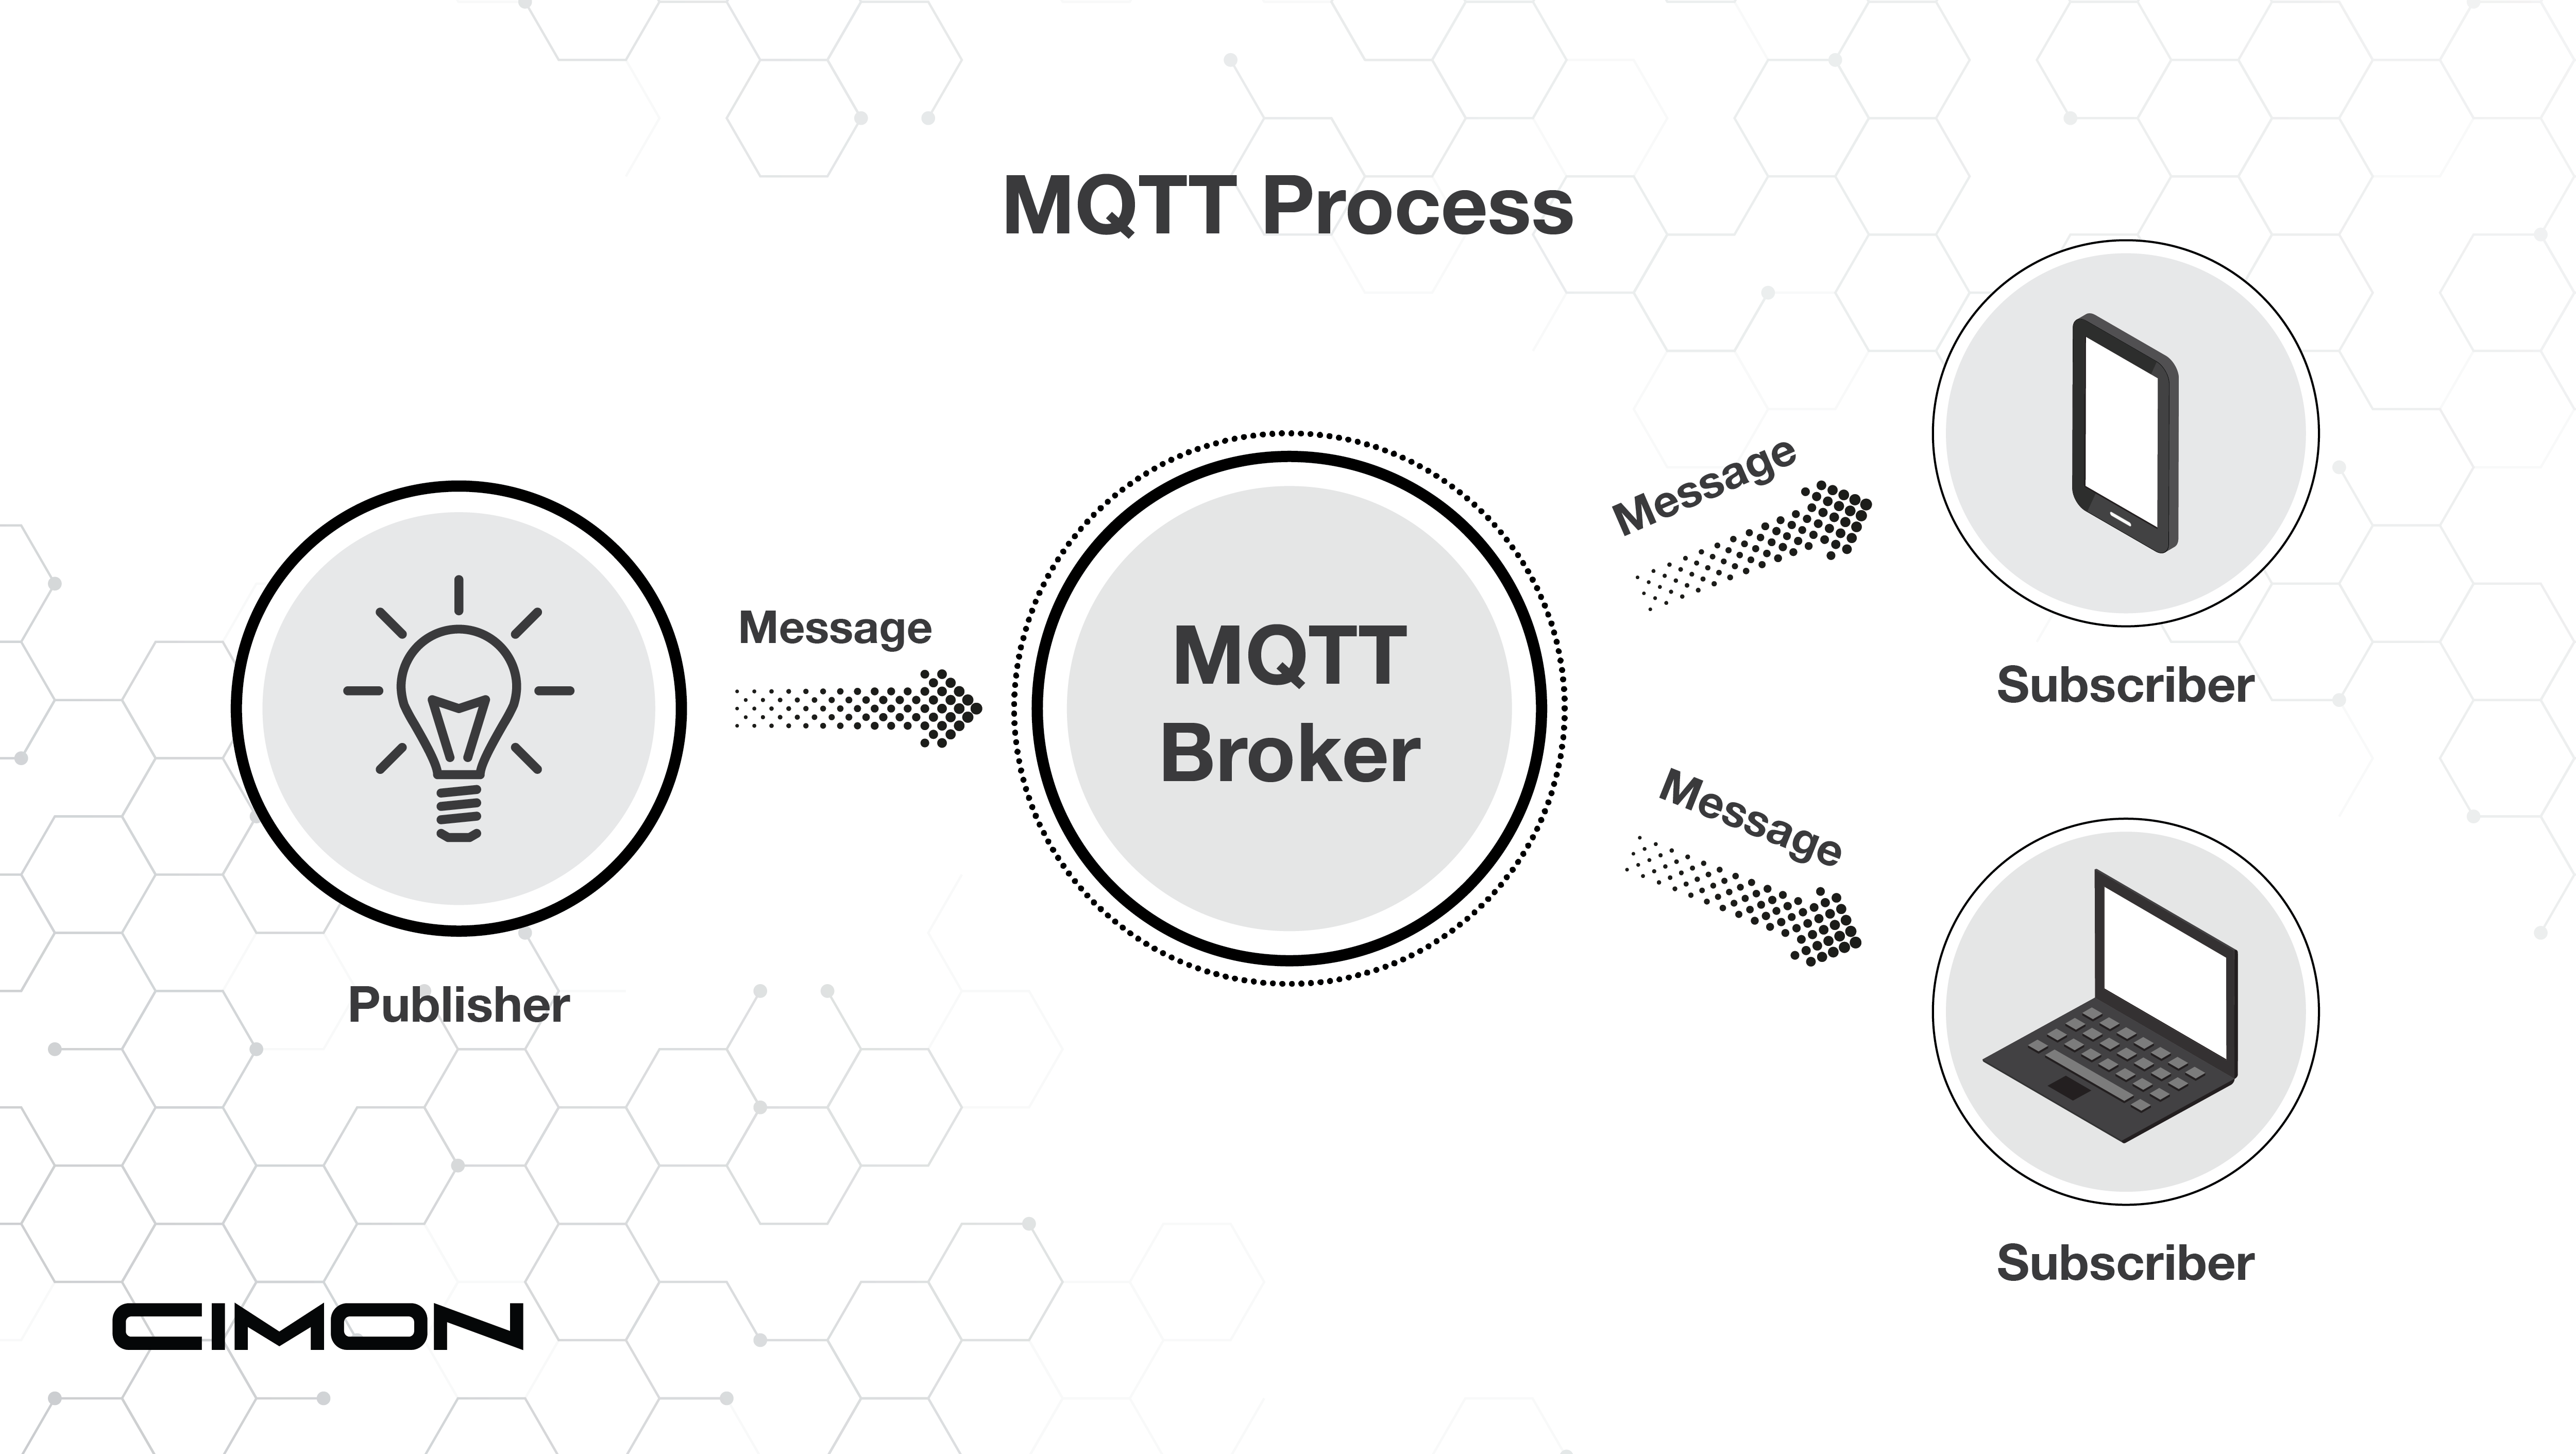 MQTT can improve efficiency by allowing for real-time monitoring of systems and the control of processes and reducing downtime for industrial automation.